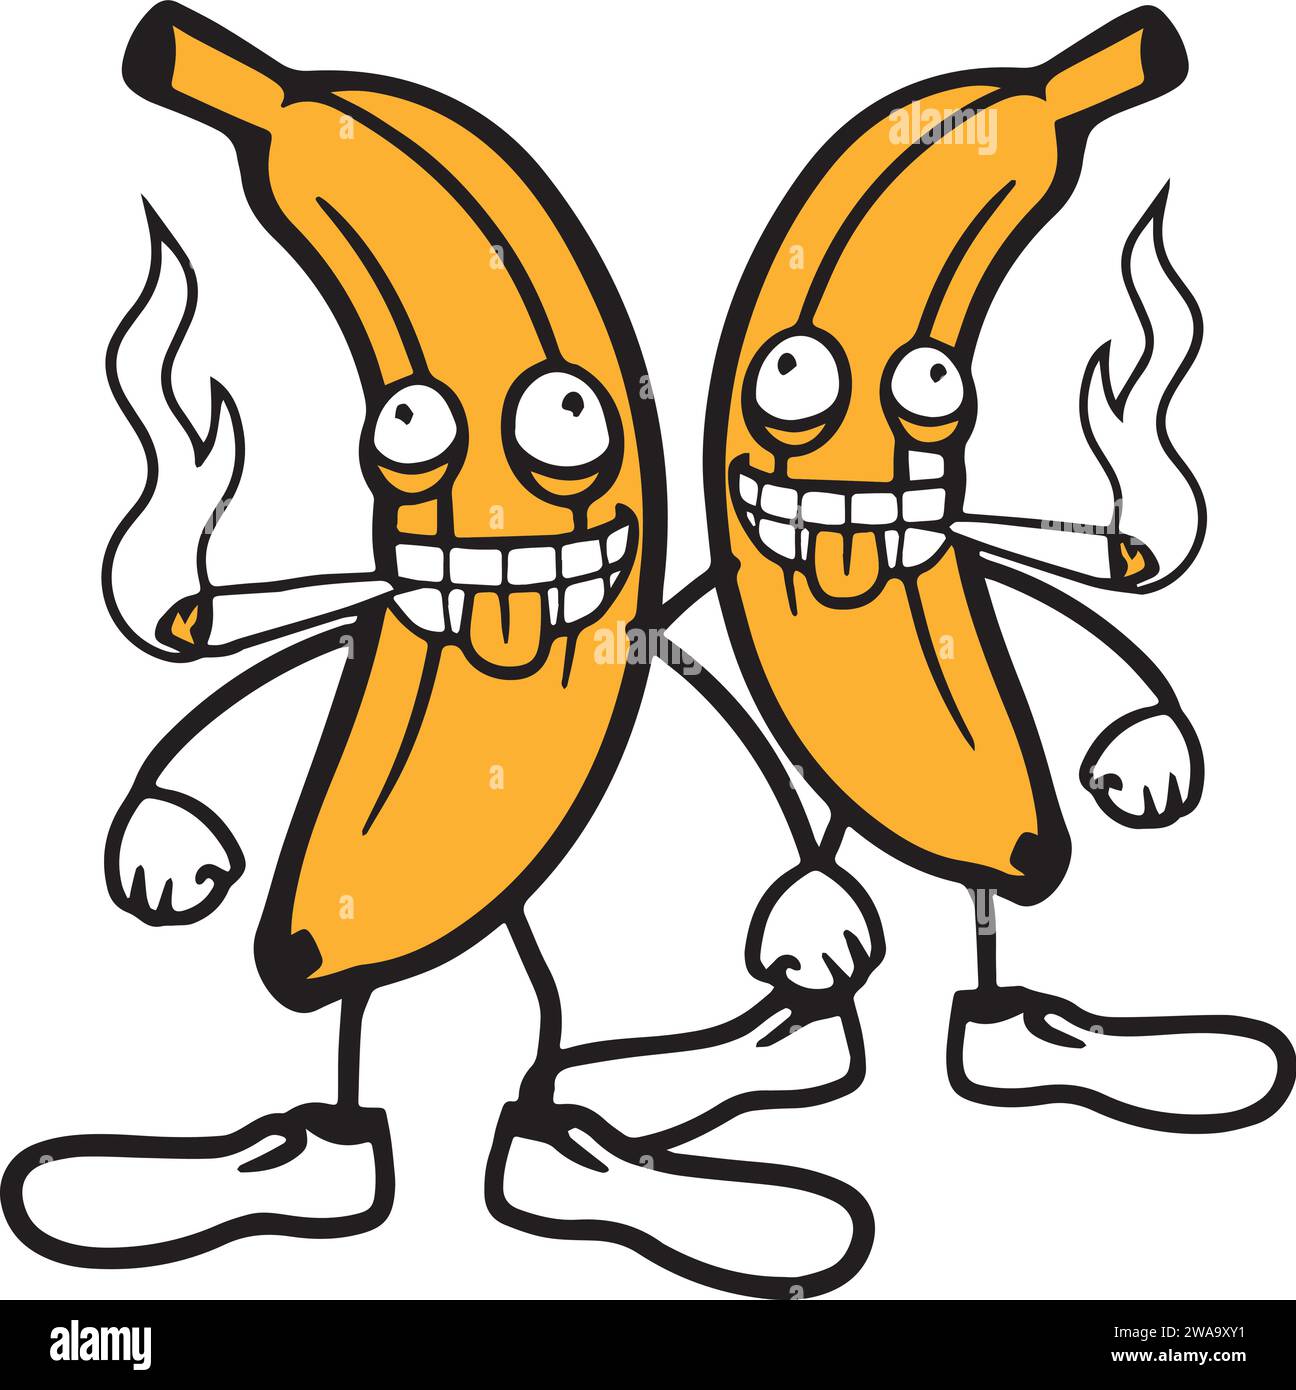 Crazy bananas smoking weed, vector illustration, cut files design for clothes, t-shirts, mugs, posts and more Stock Vector